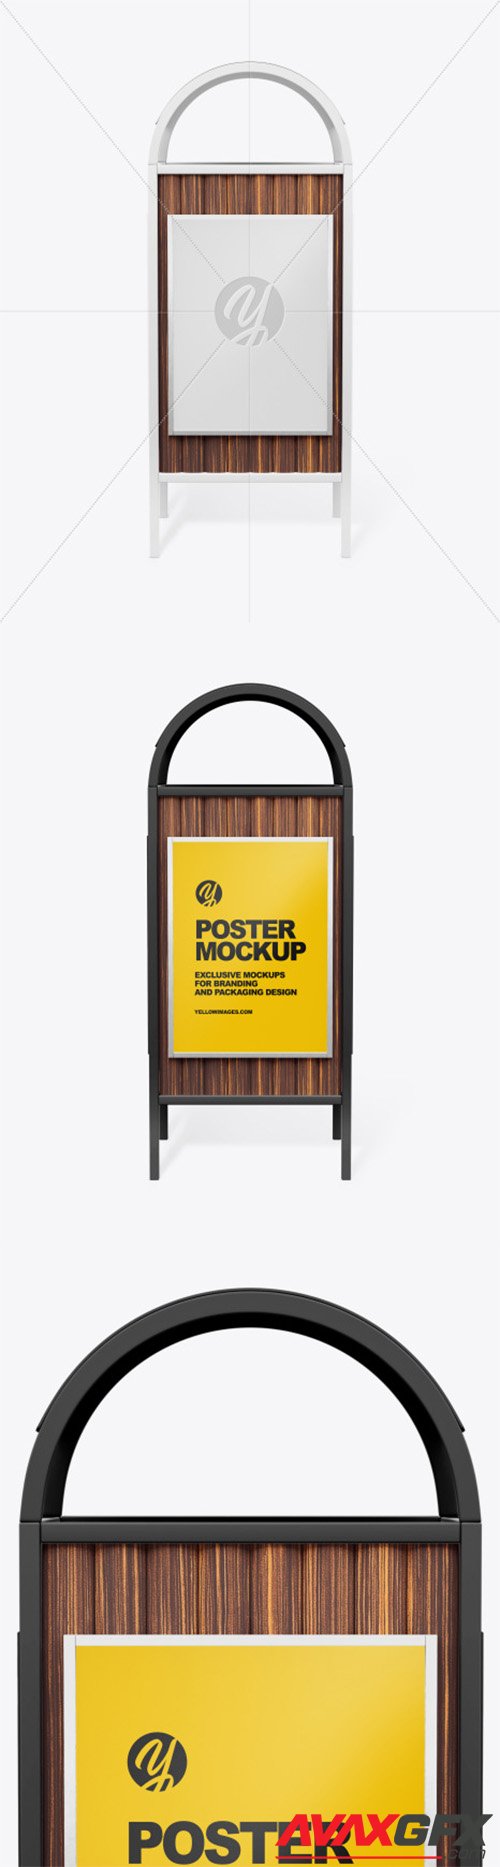 Rubbish Bin with Poster Mockup - Front View 54786 TIF